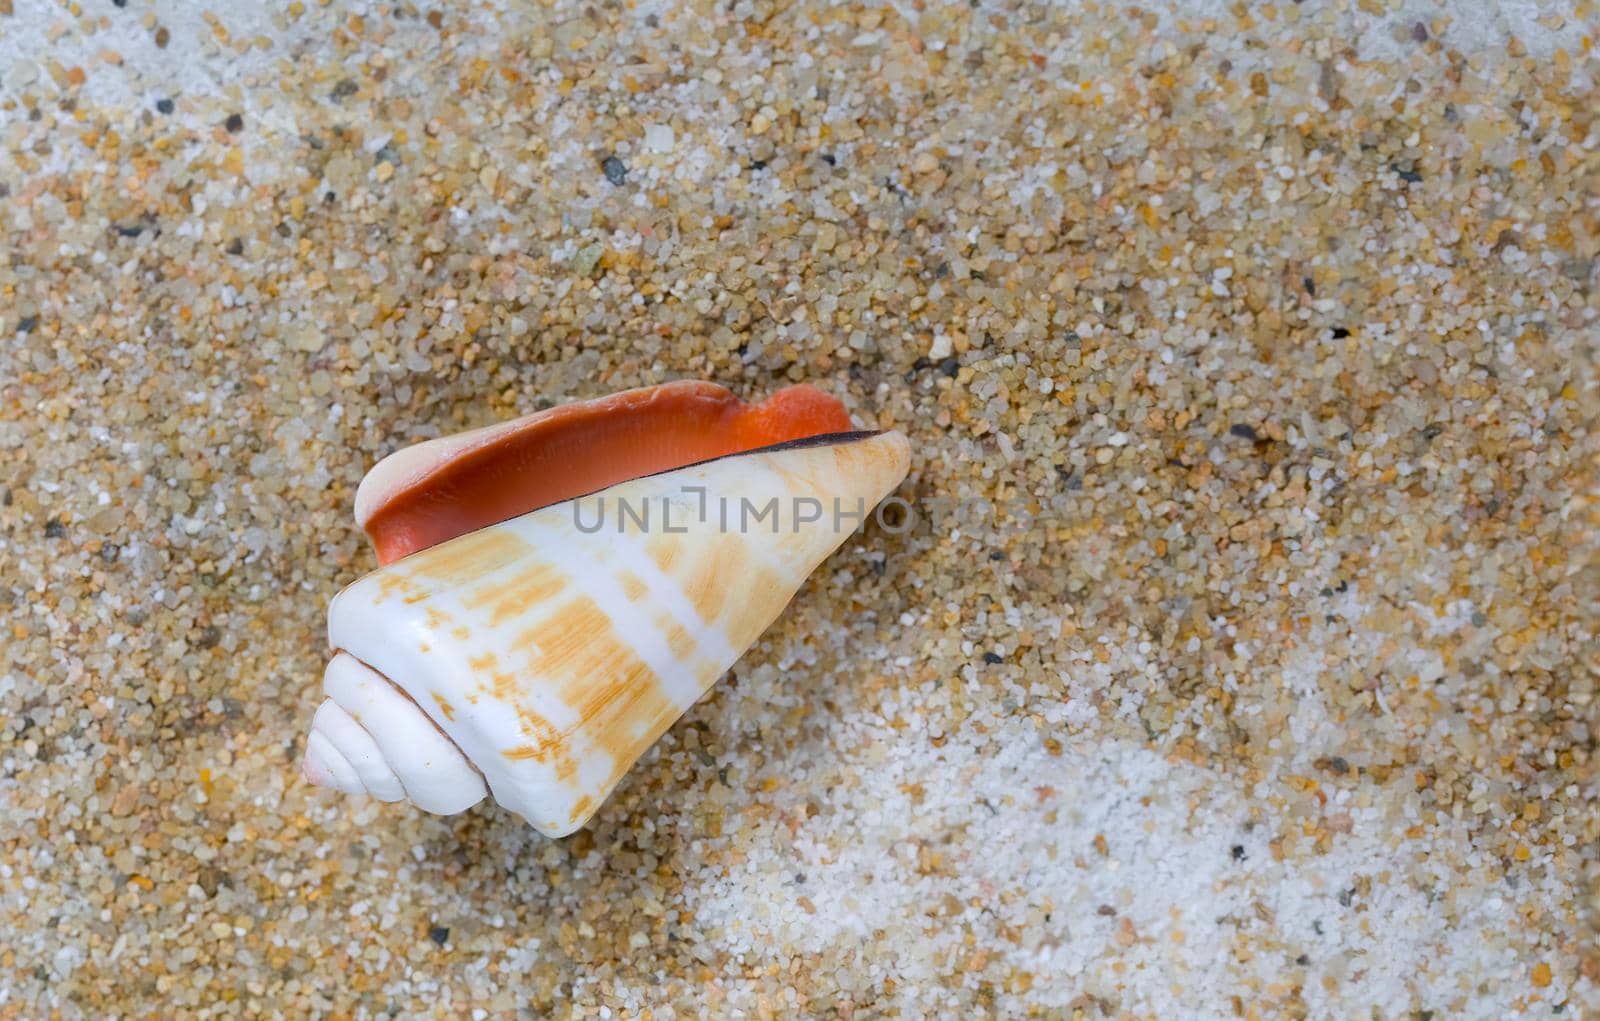 Overhead view of a cone seashell laying on sand.